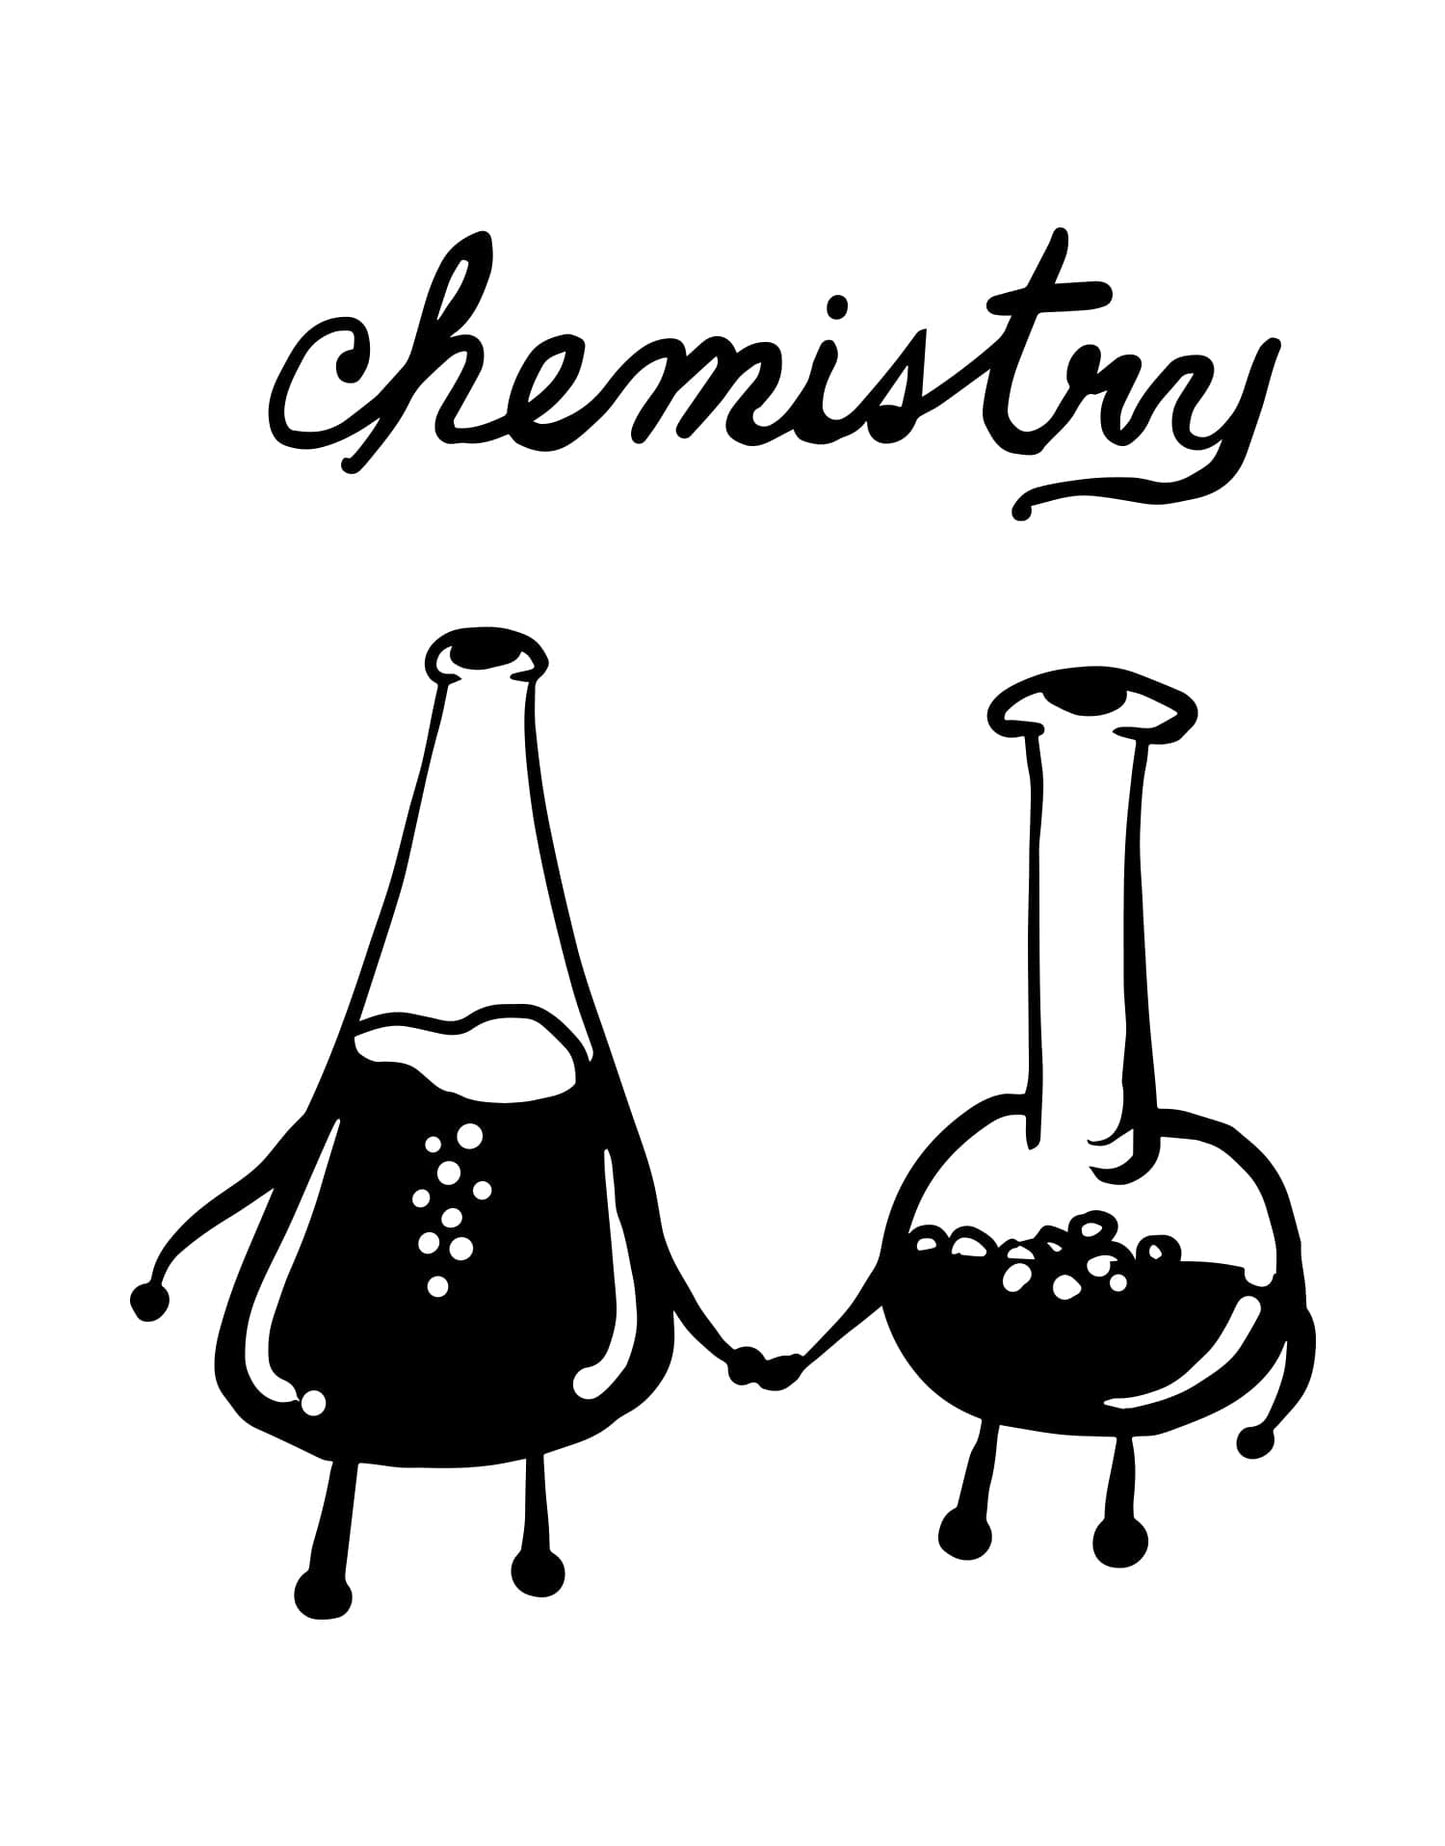 Chemistry Set Beakers Love Birds. Great School Decor for Teachers and Students. #OS_MB590